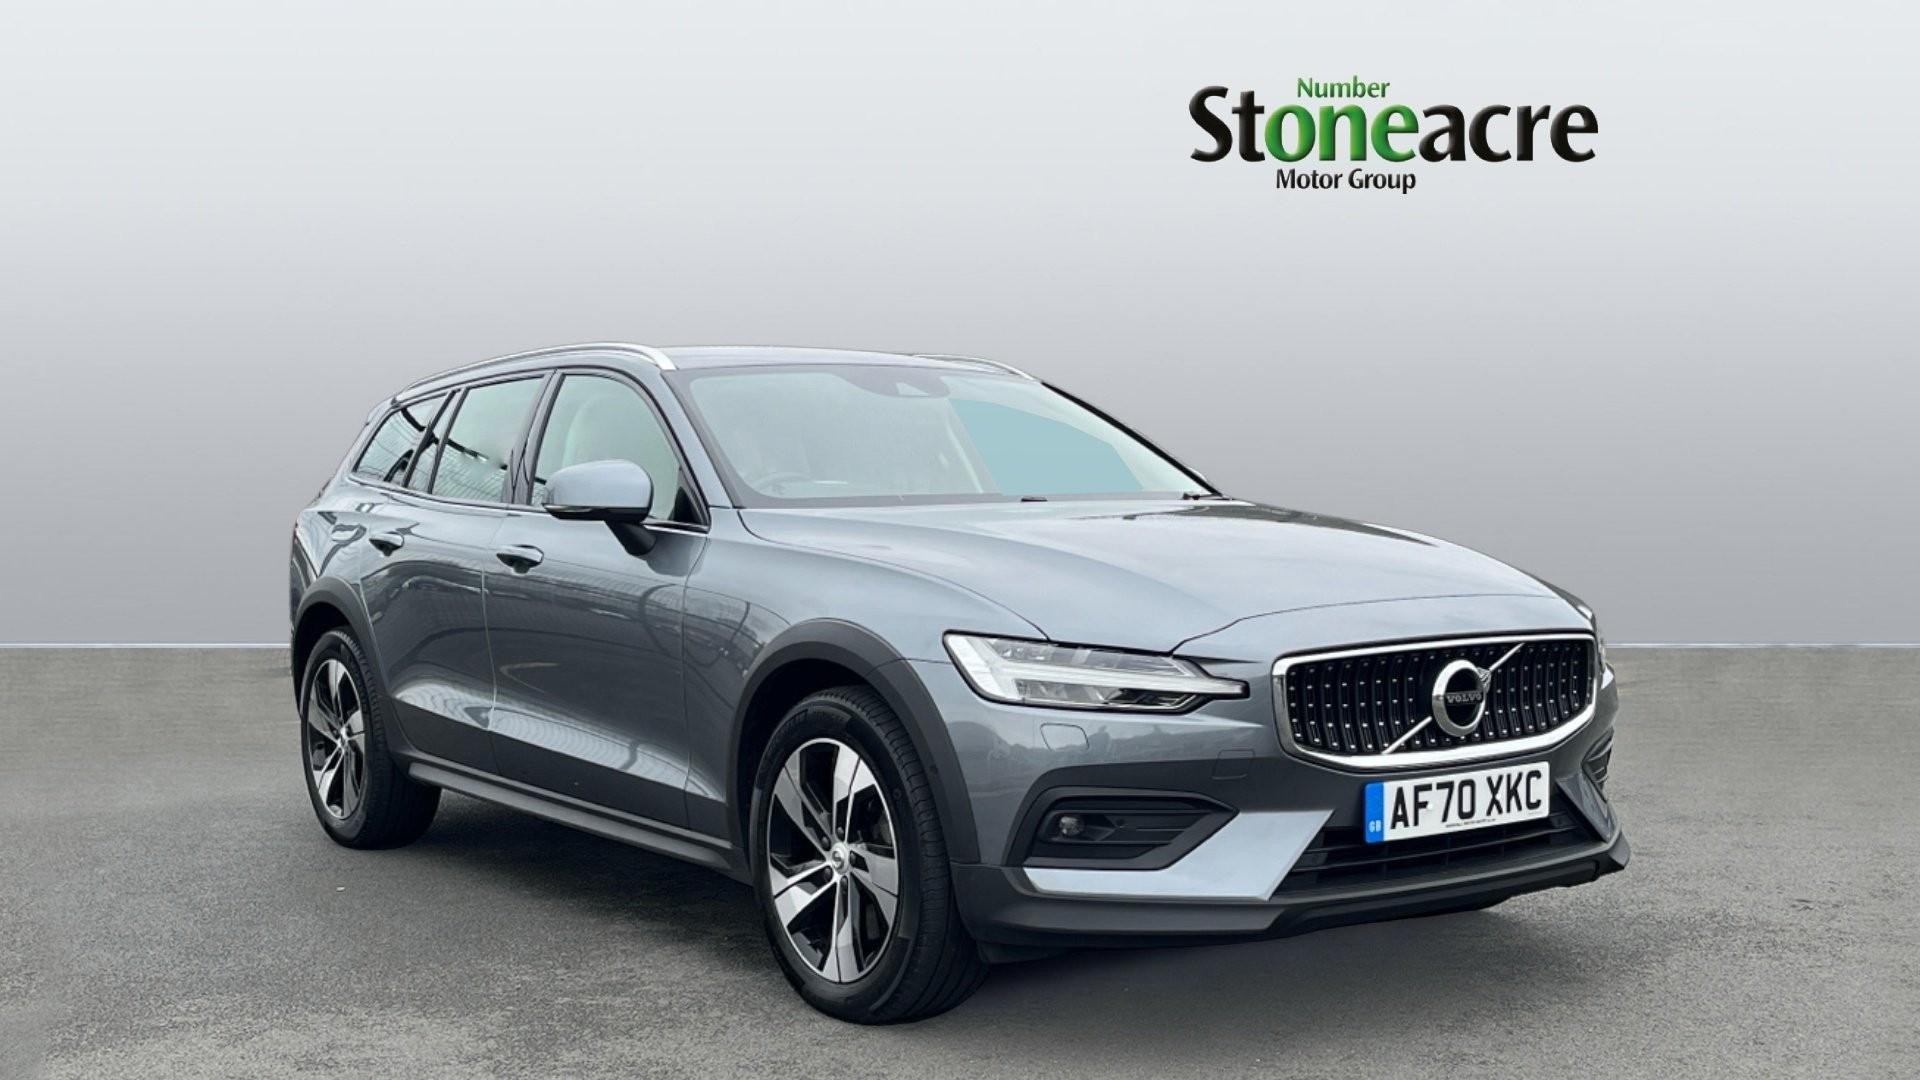 Volvo V60 2.0 B5P Cross Country 5dr AWD Auto (AF70XKC) image 0